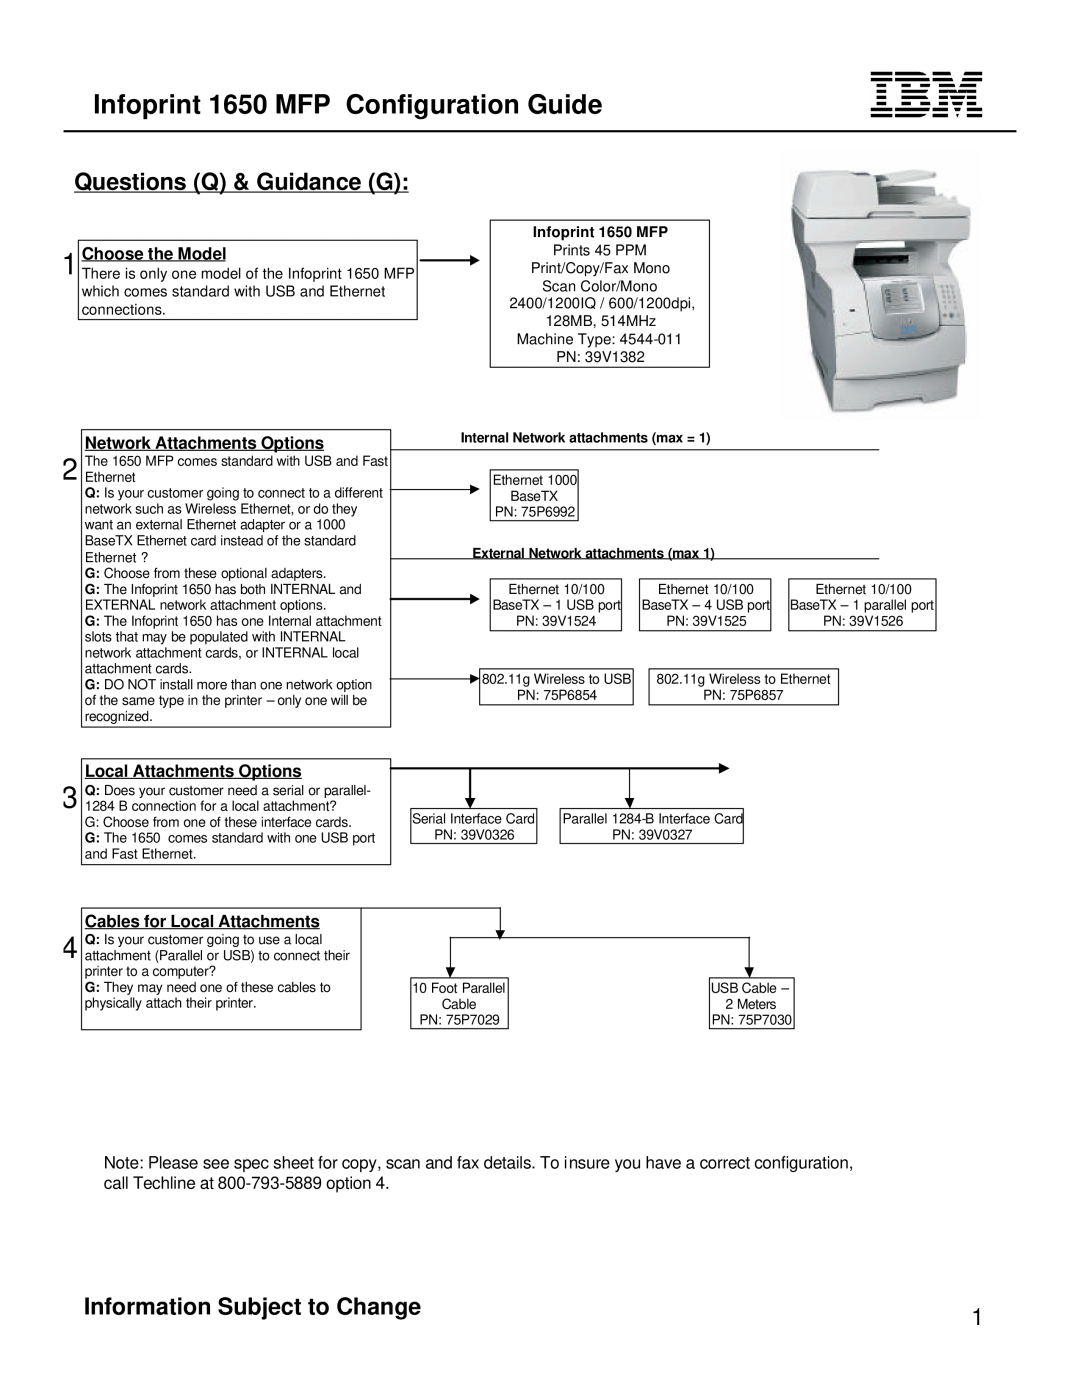 IBM manual Infoprint 1650 MFP Configuration Guide, Questions Q & Guidance G, Information Subject to Change 